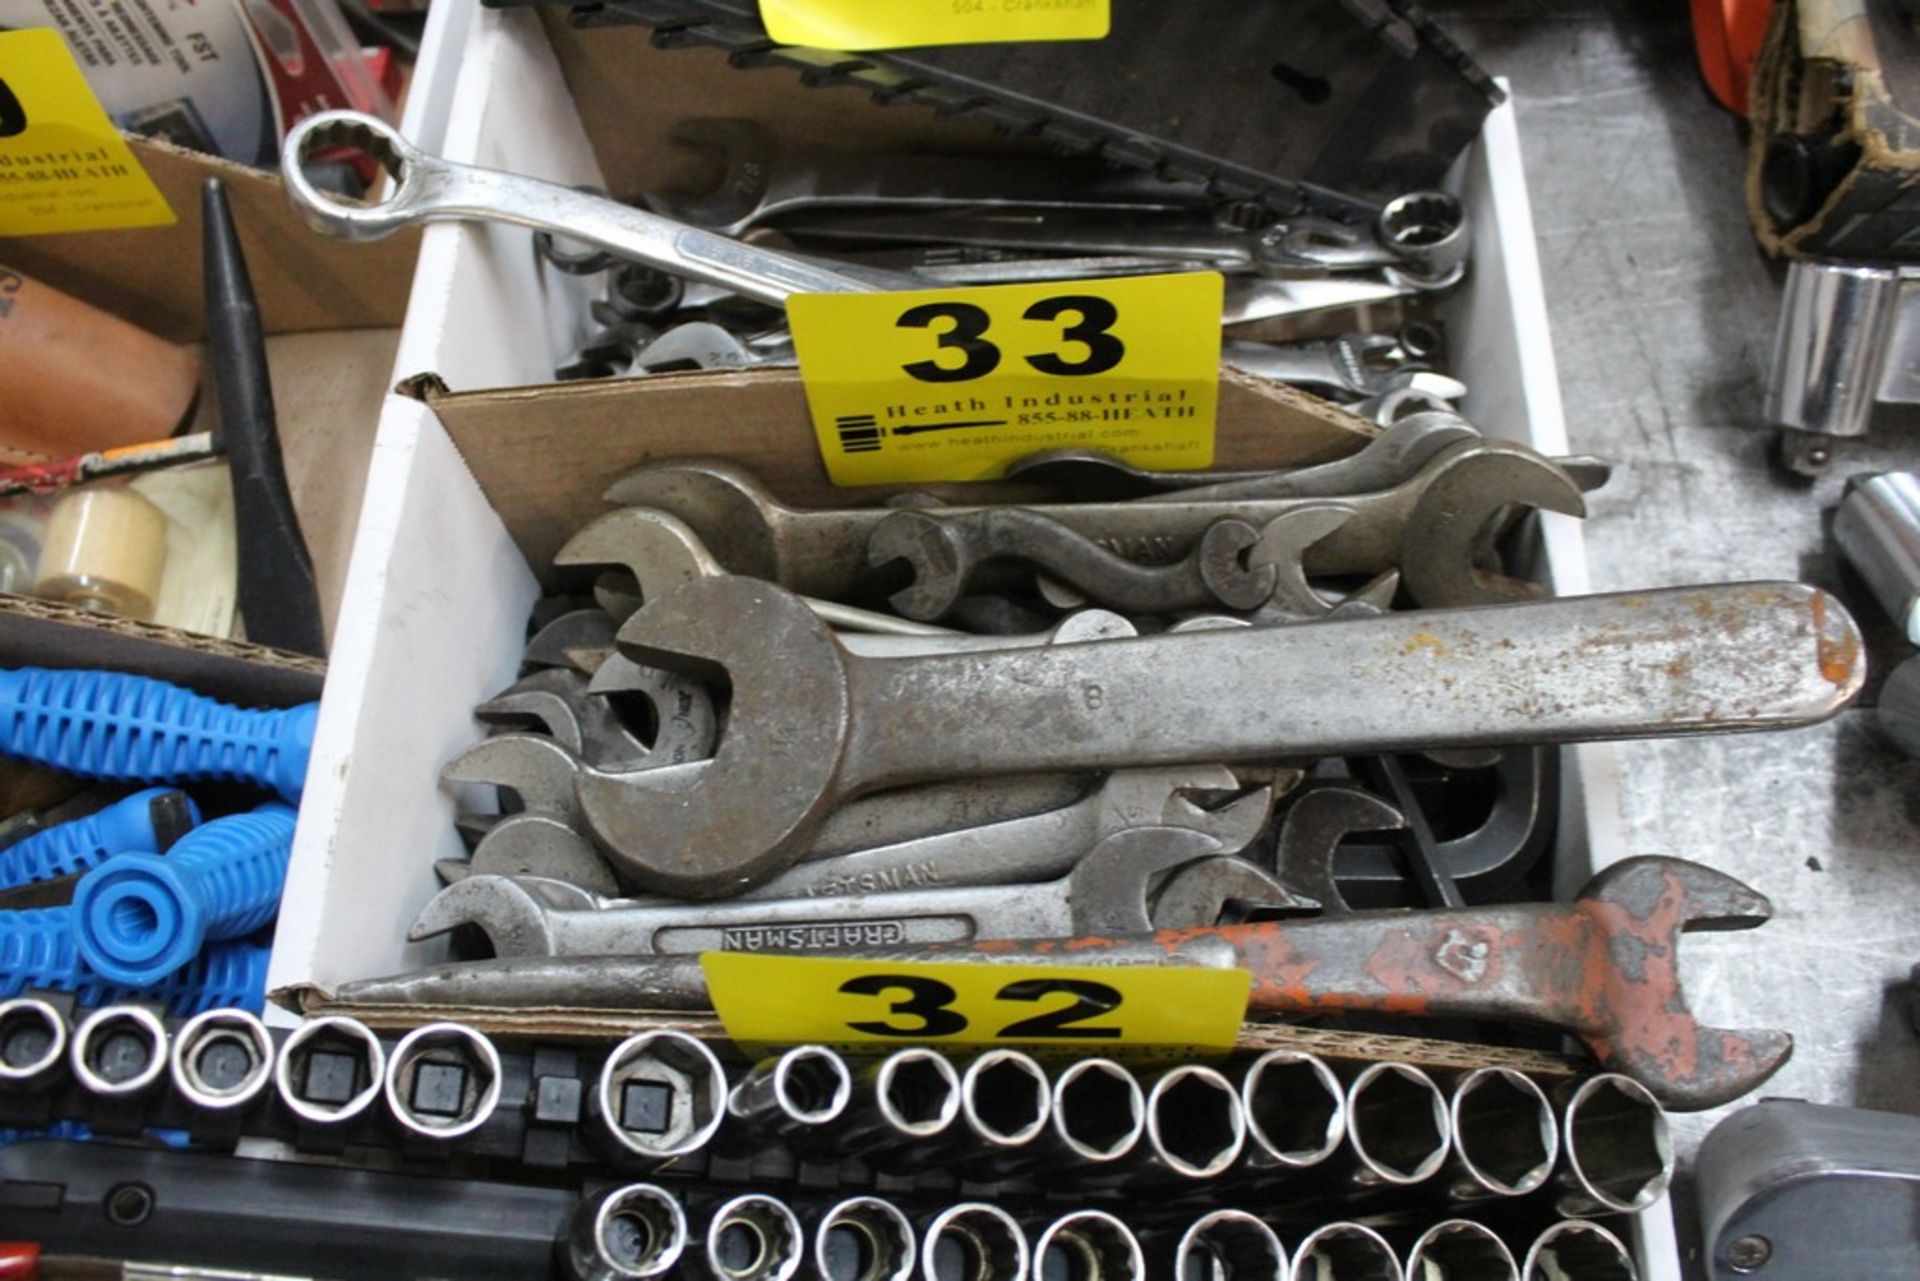 LARGE QUANTITY OF WRENCHES